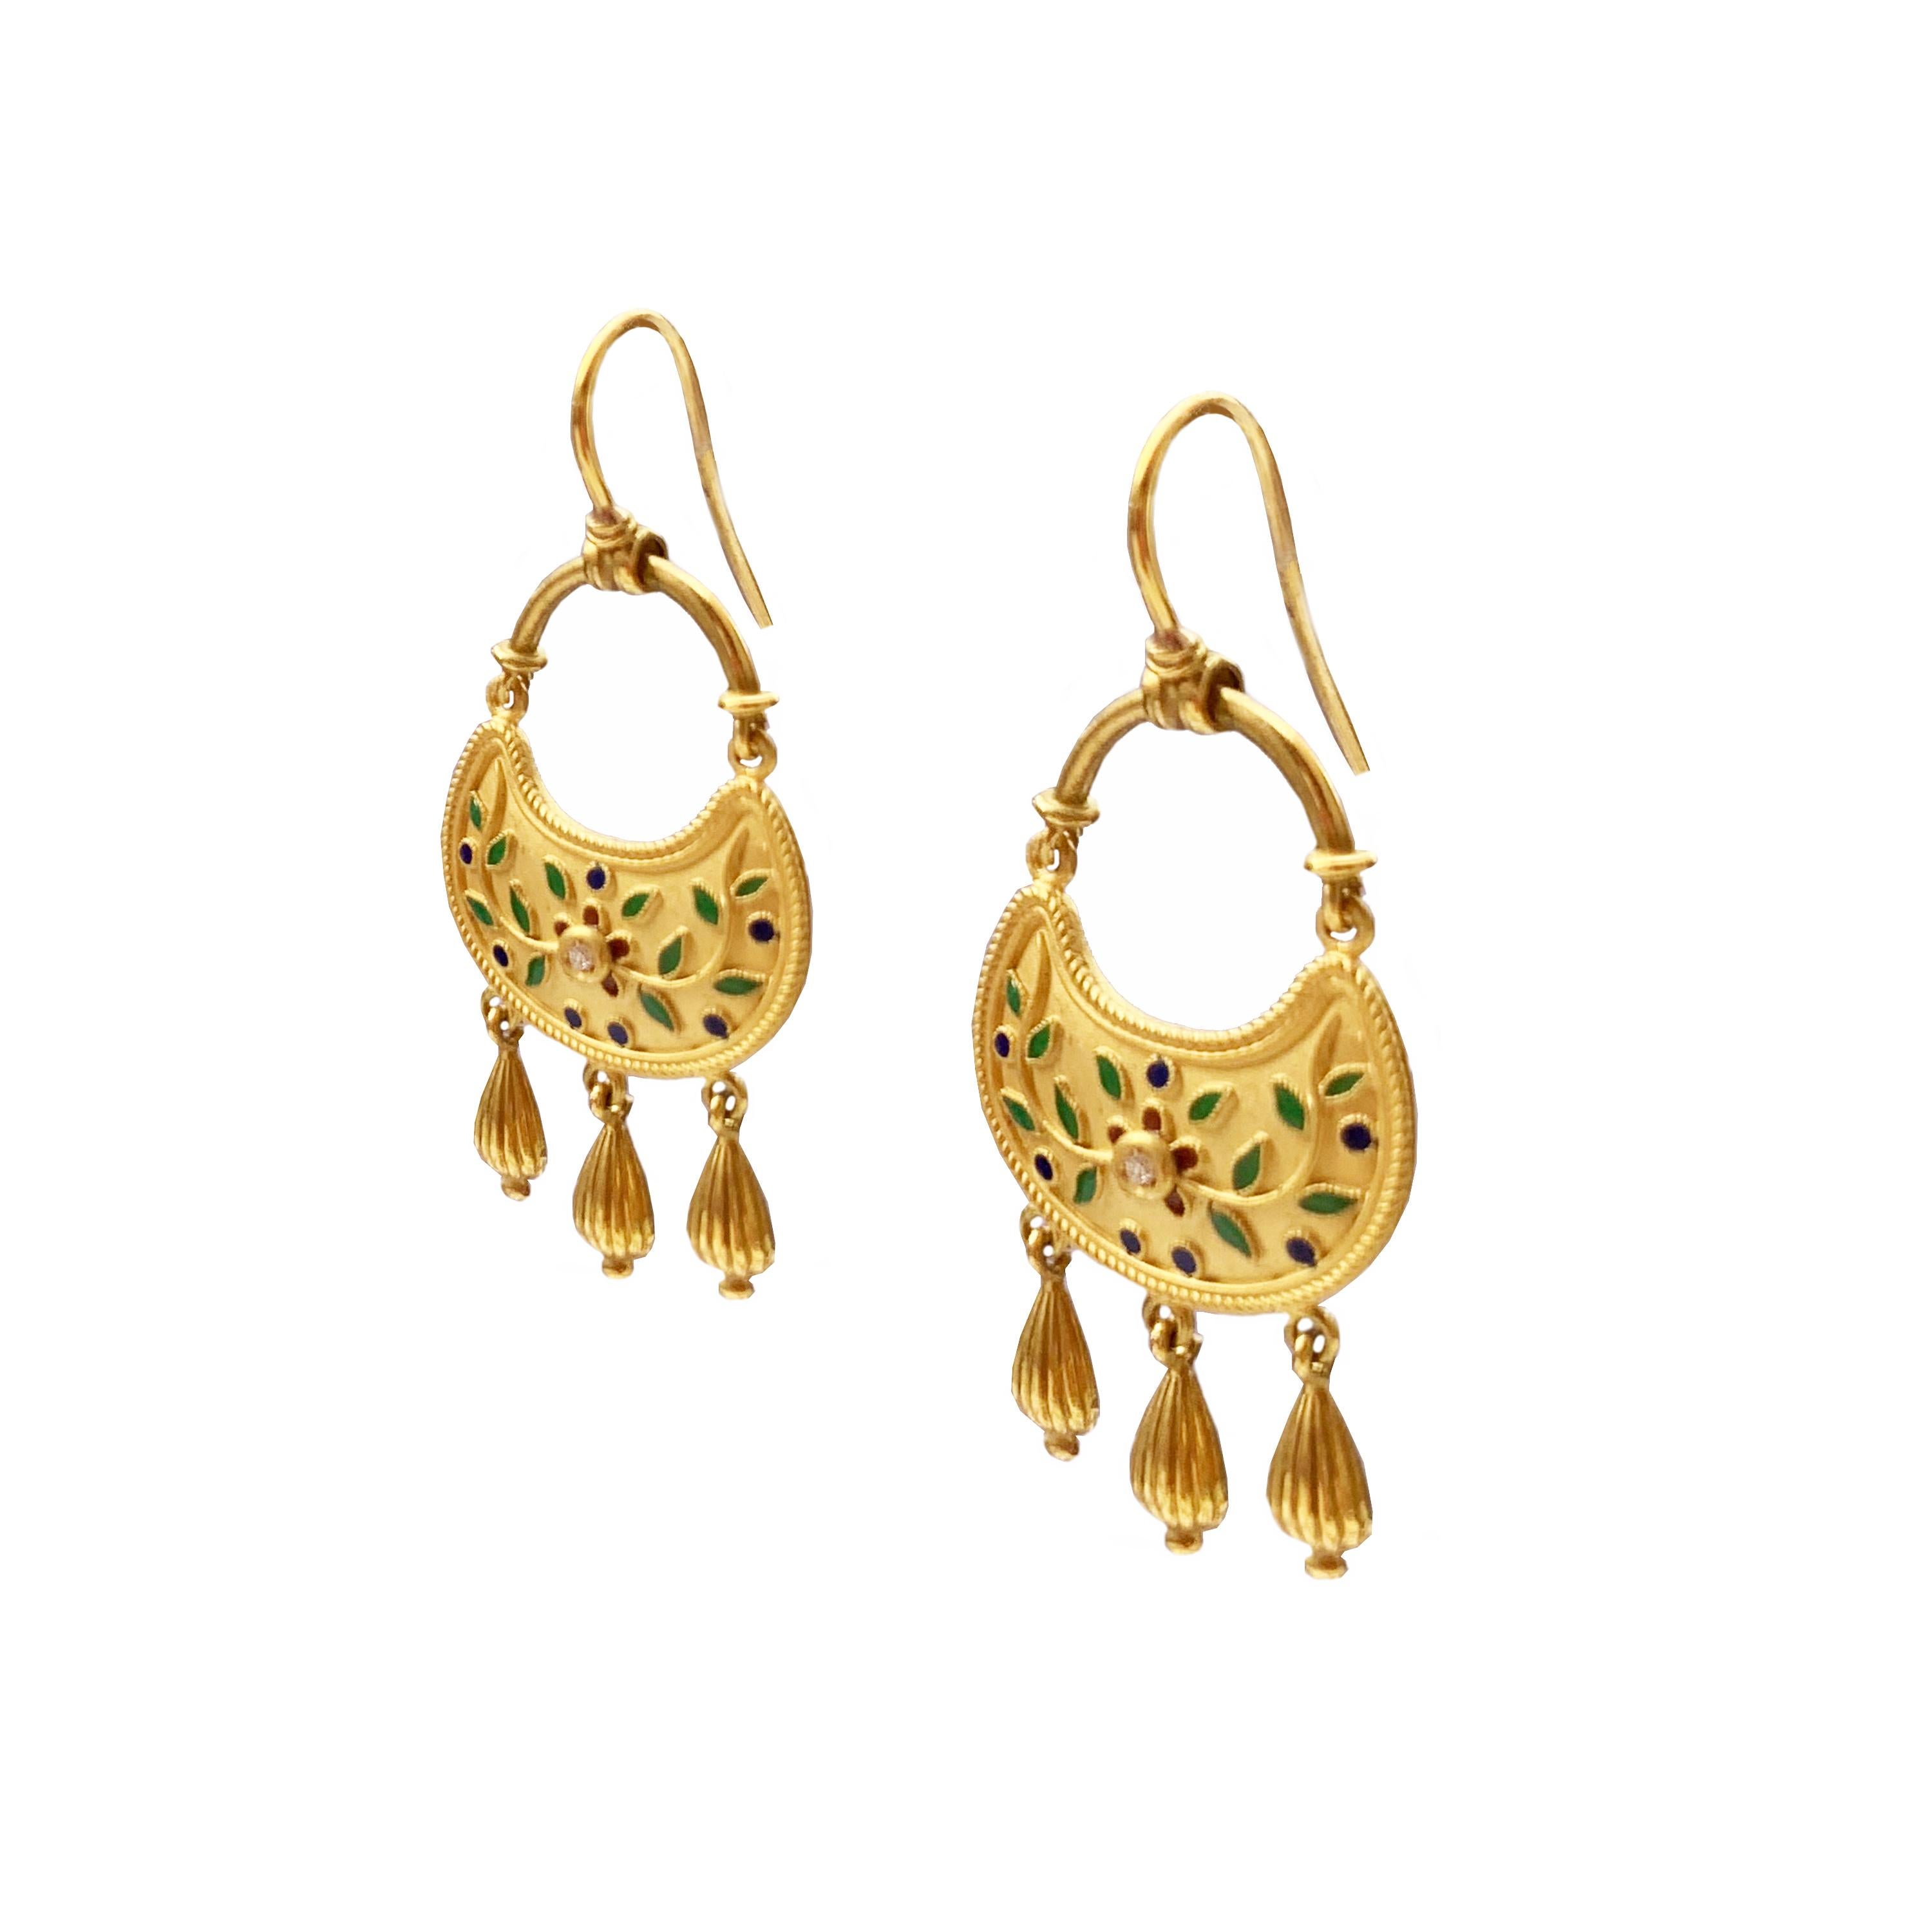 These 18 Kt gold and enamel earrings were designed by me and handmade by the artisans of my shop, SERRA, opened in Rome in 1910 and located in via Margutta 57, in the historic center of the city, a few steps from Piazza di Spagna!

The earrings have